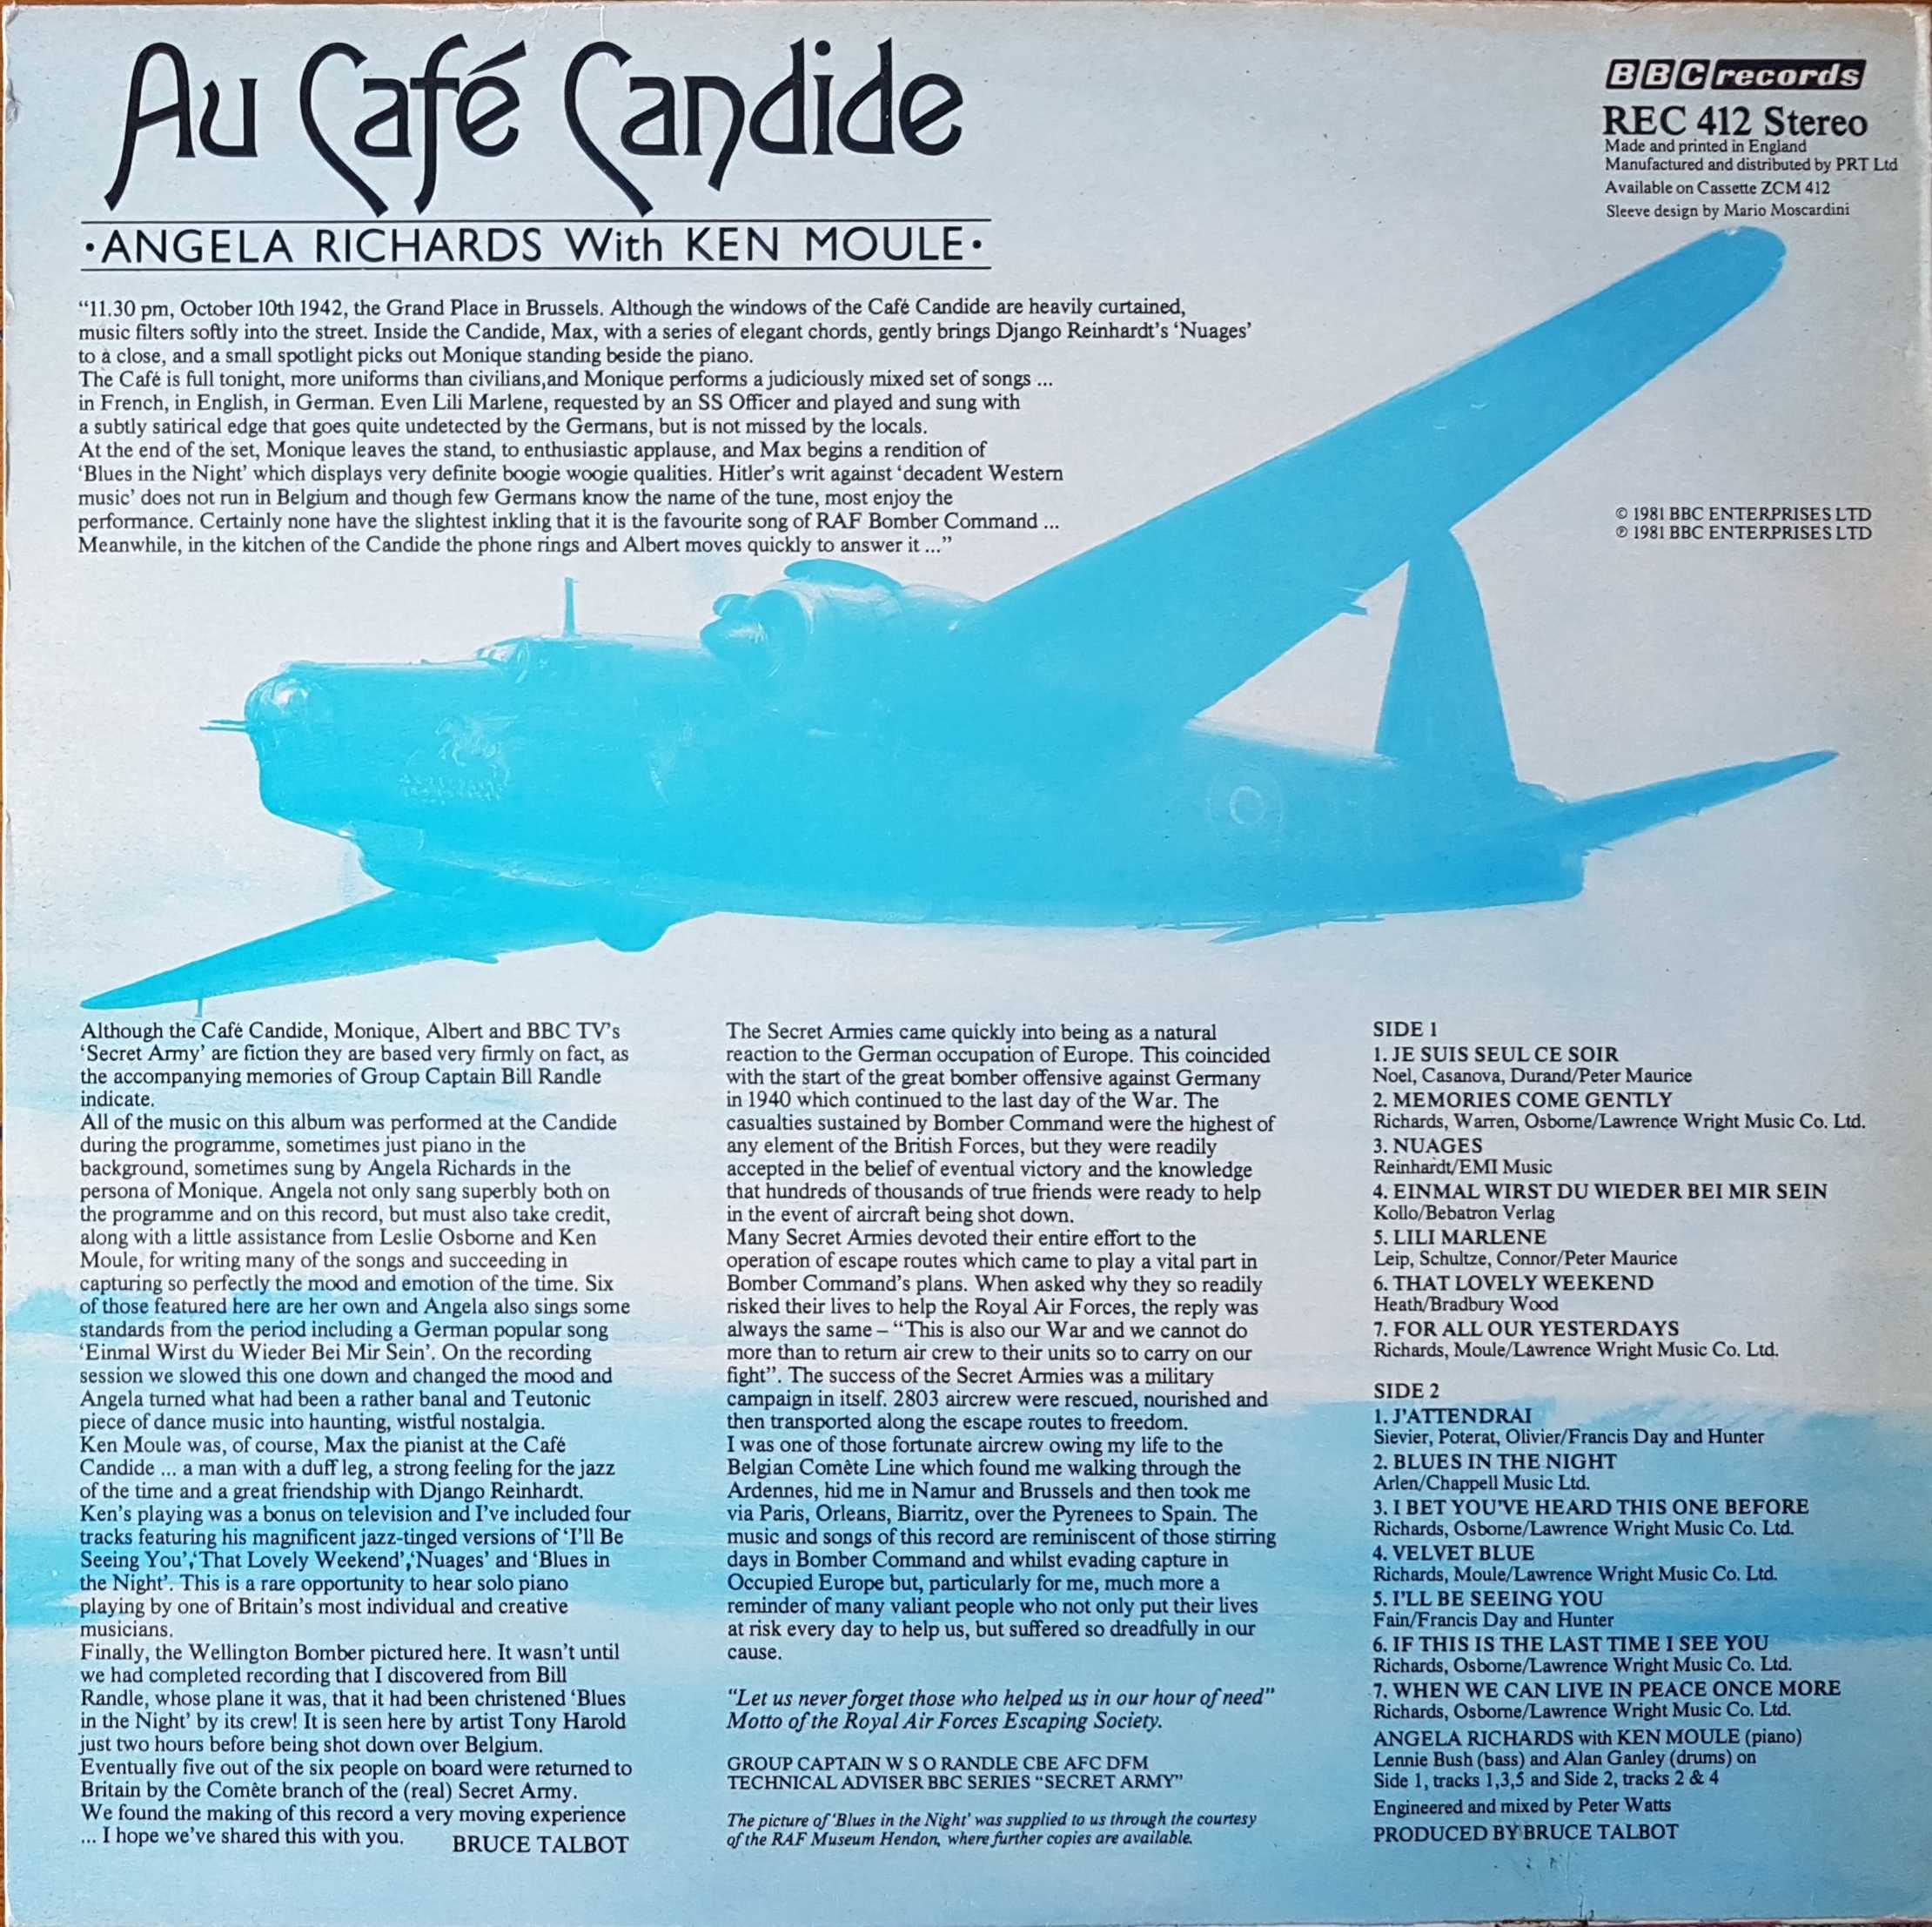 Picture of REC 412 Au cafe Candide (Secret army) by artist Unknown from the BBC records and Tapes library